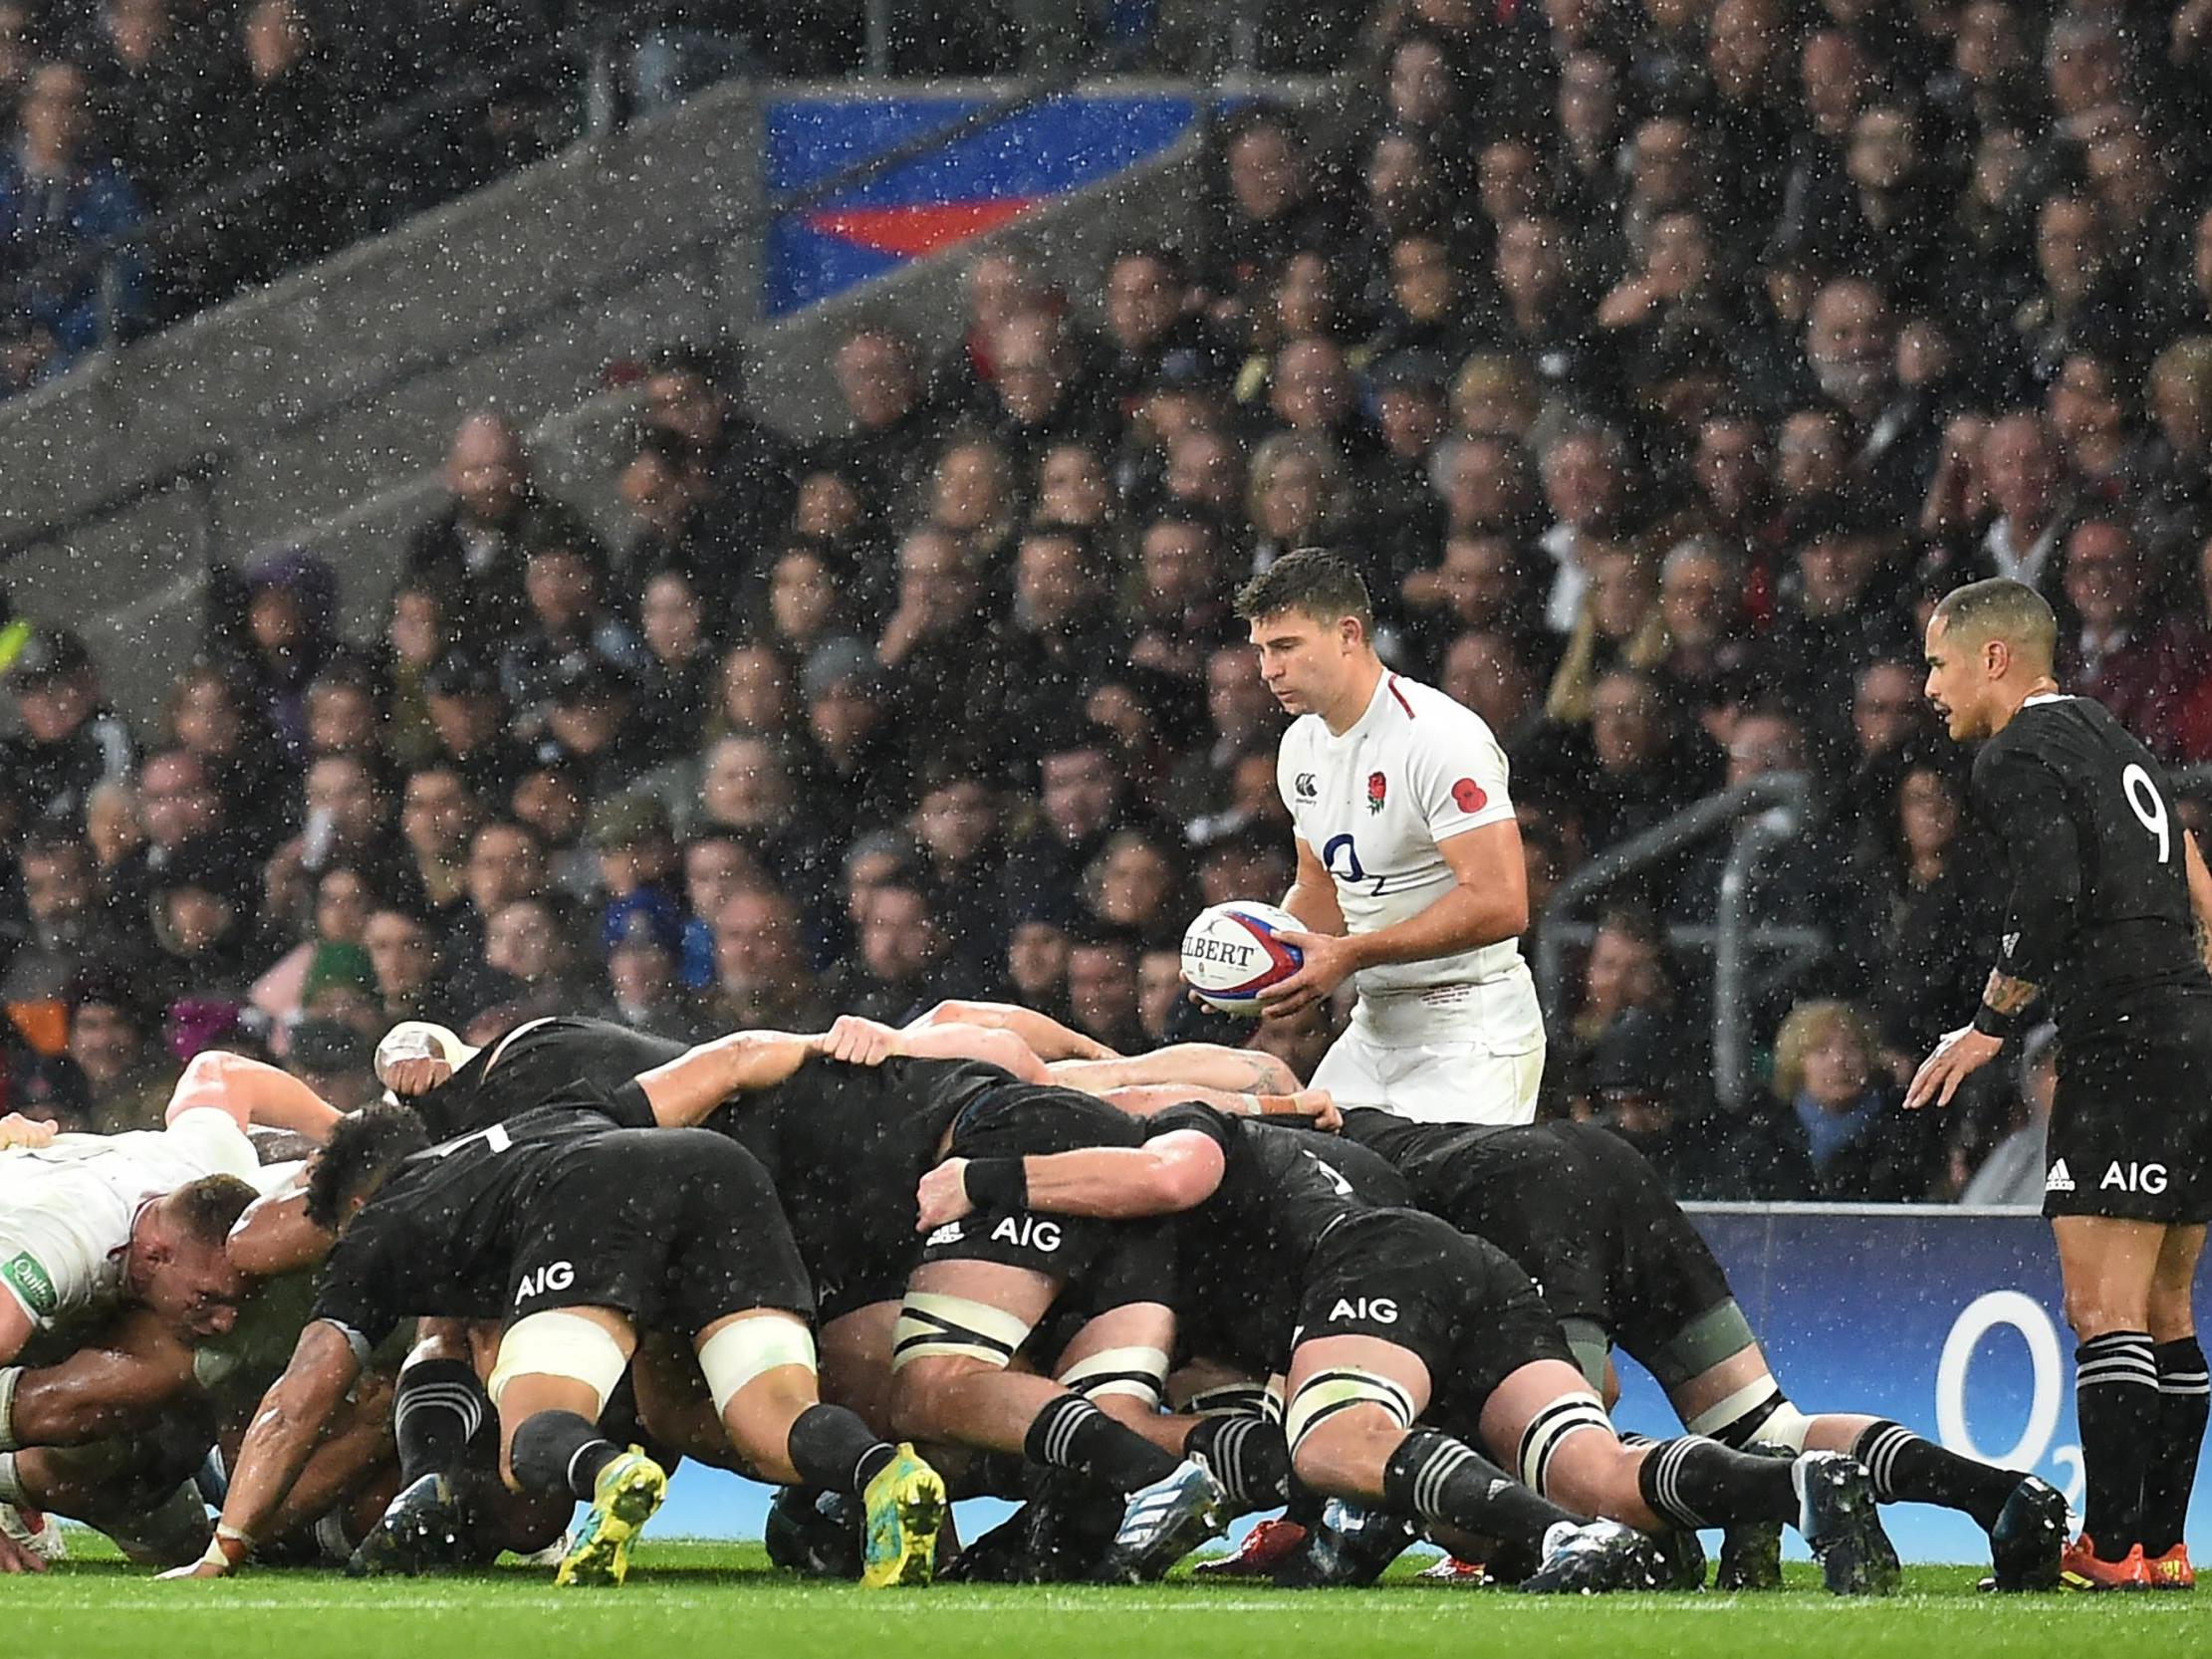 Ben Youngs readies for the put-in during an England scum on Saturday